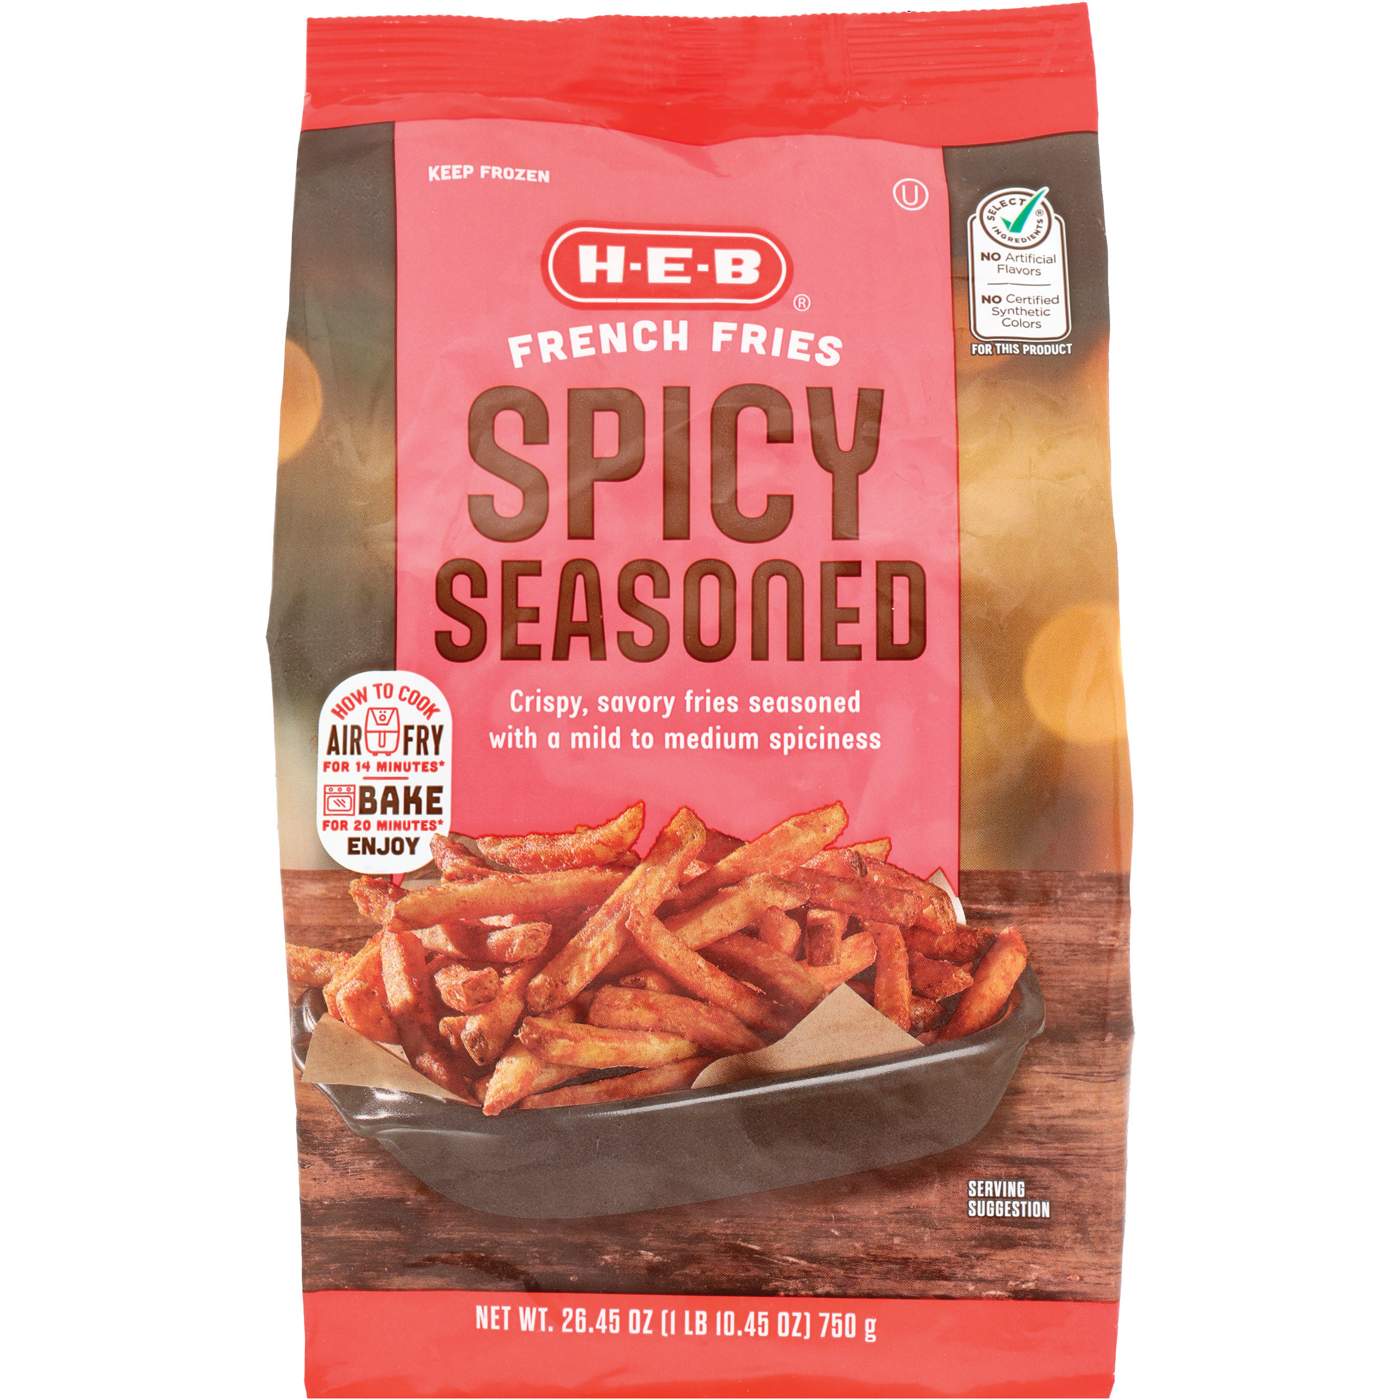 H-E-B Frozen French Fries – Spicy Seasoned; image 1 of 2